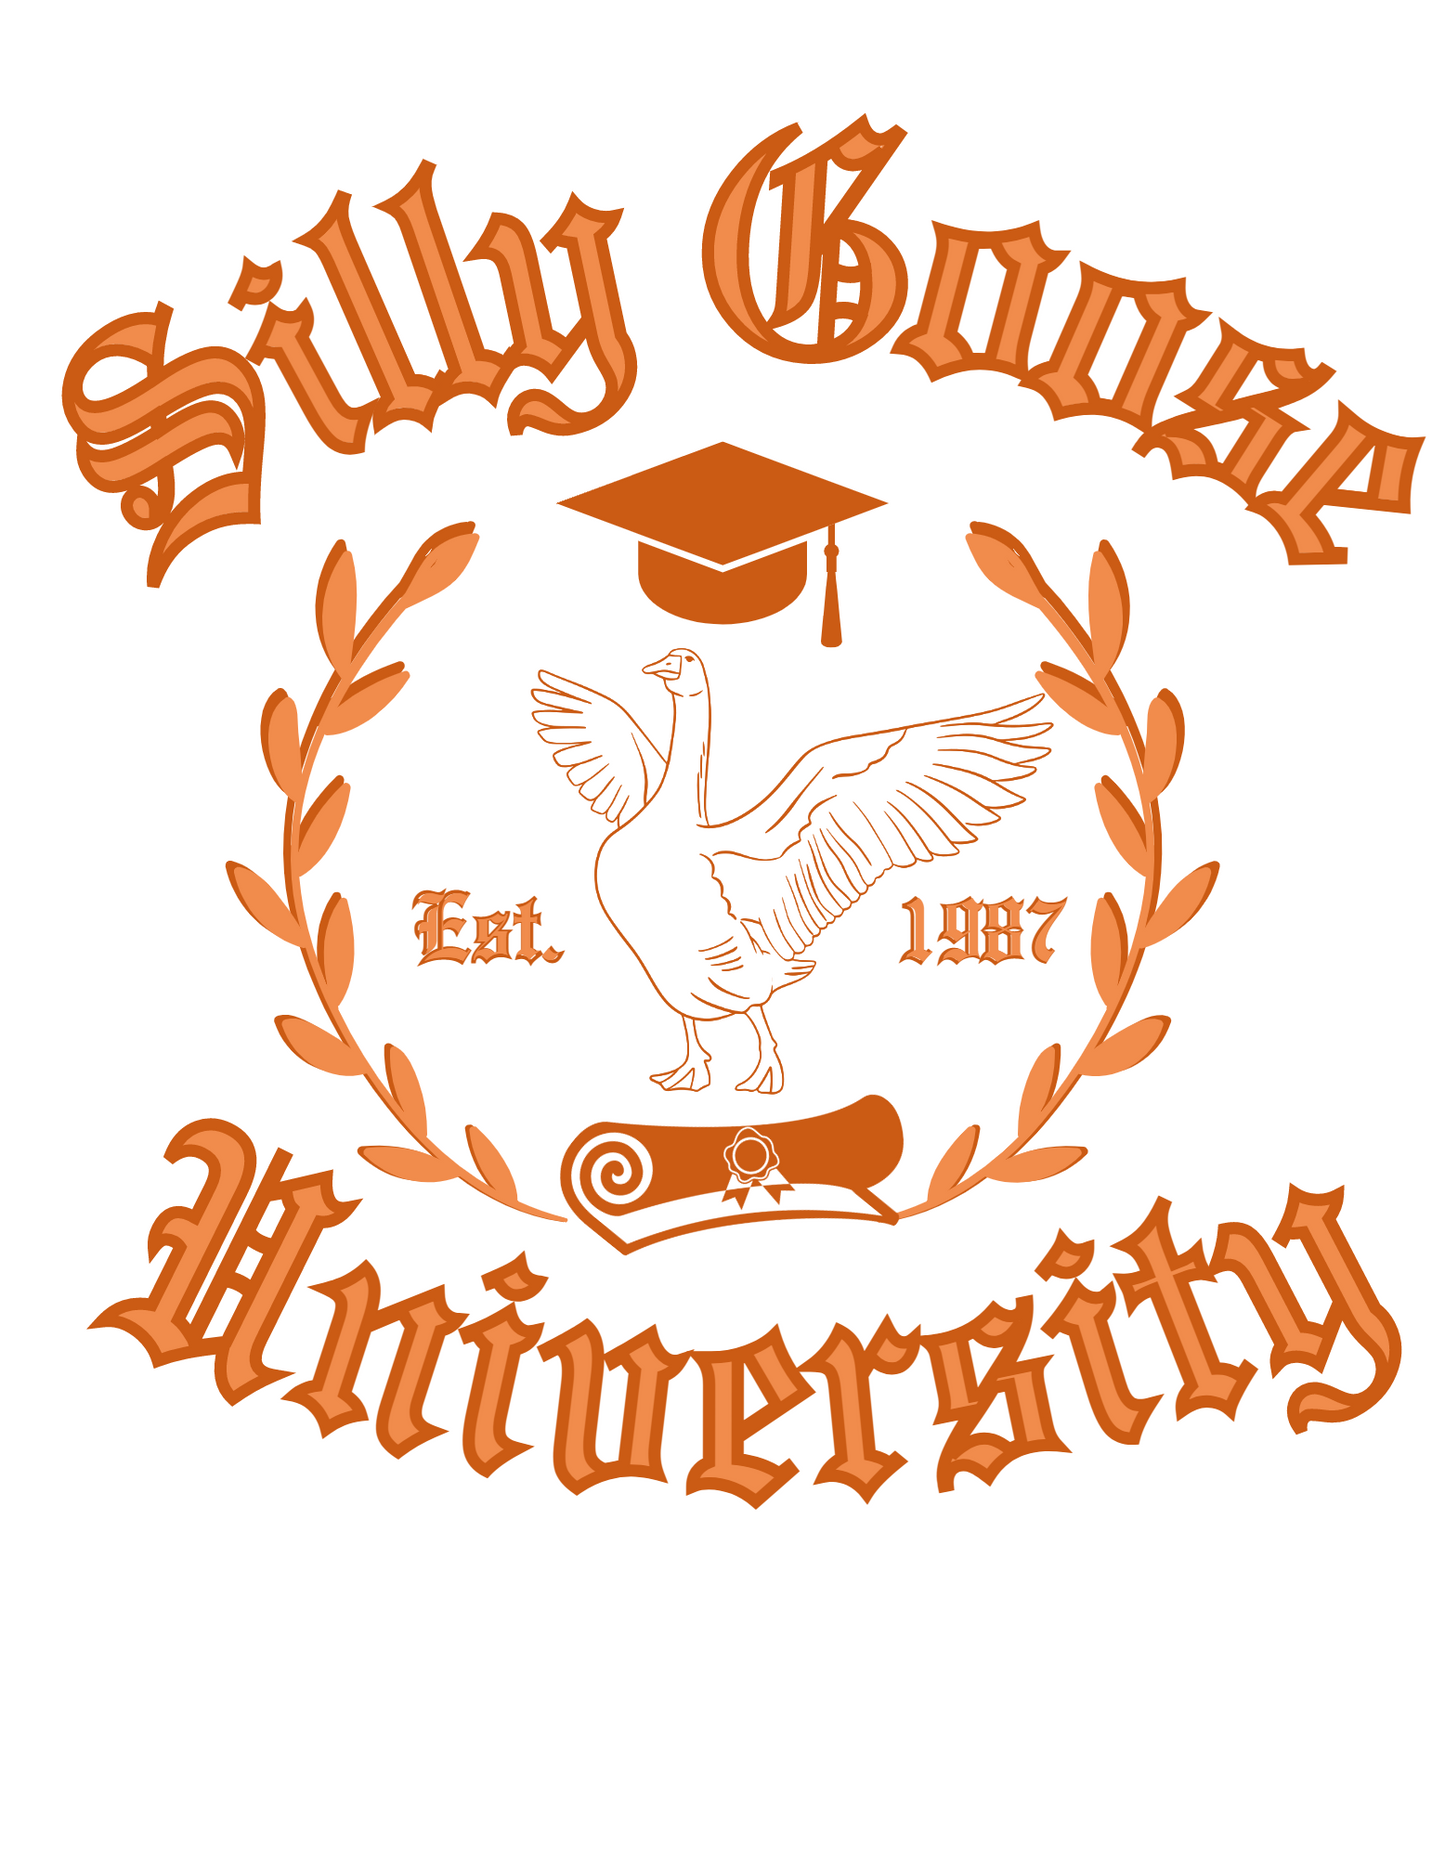 Silly Goose University Graphic Tee - Many Colors Available!